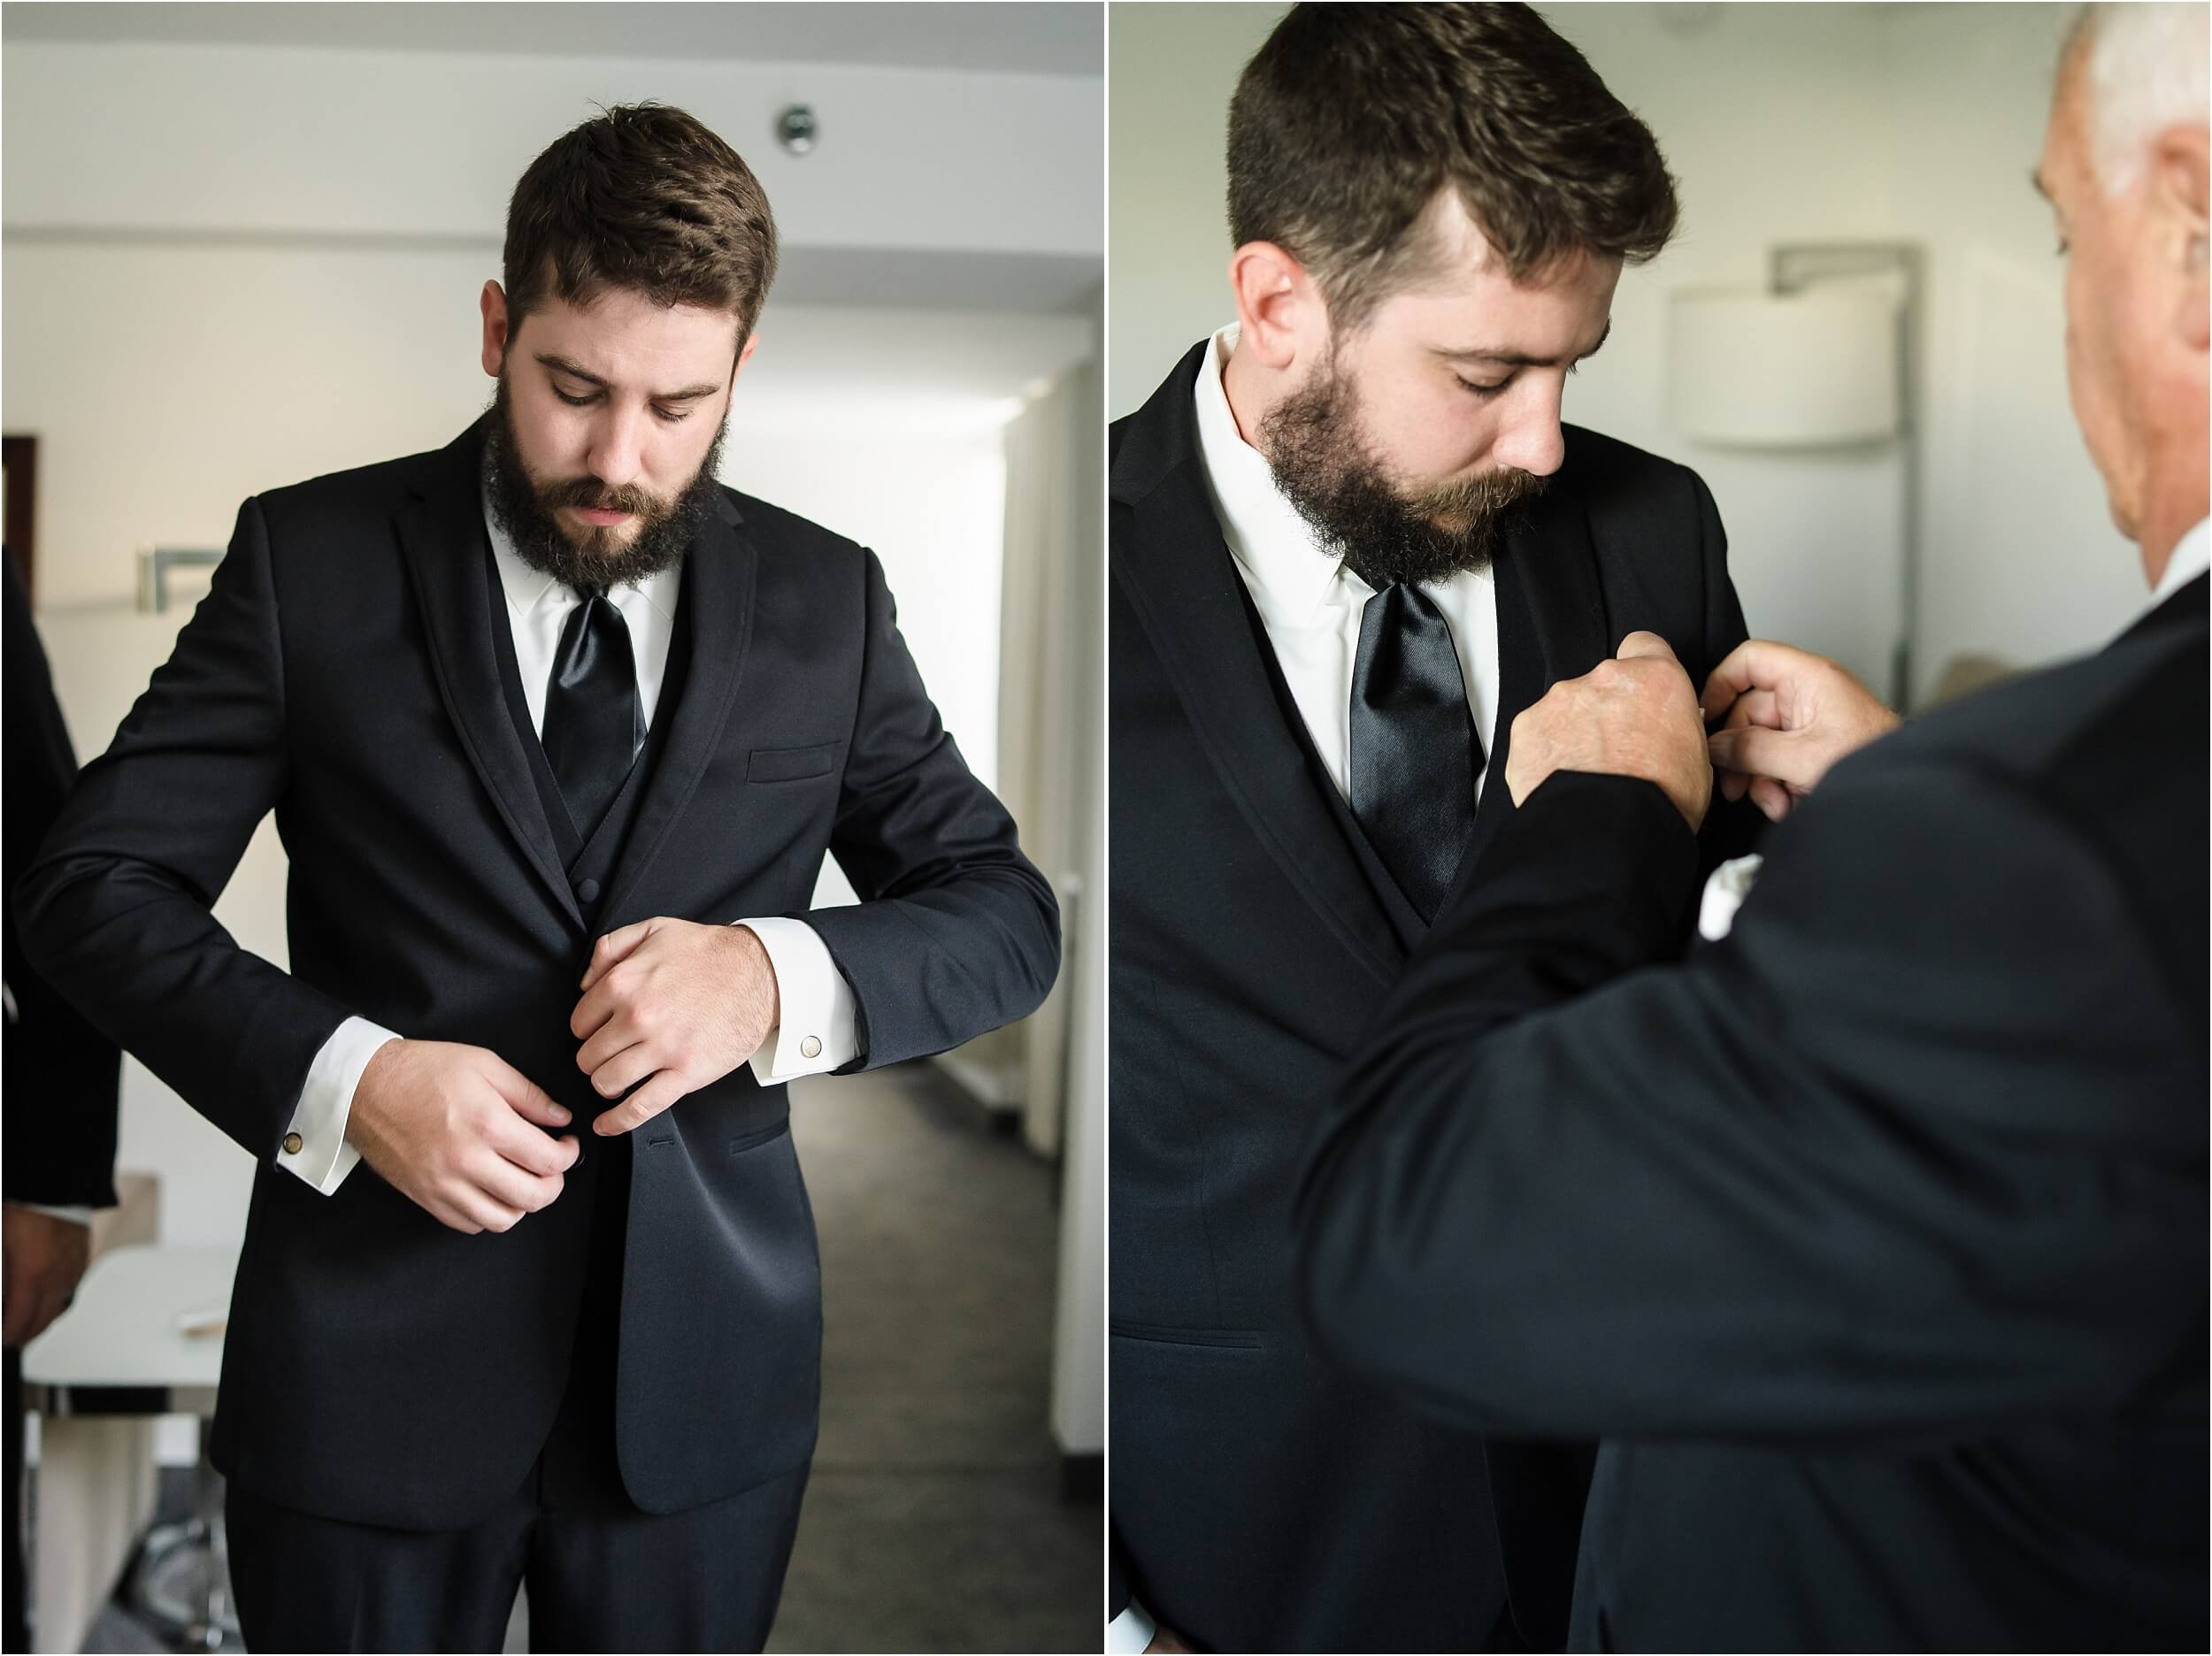  A groom buttoning up his jacket.  